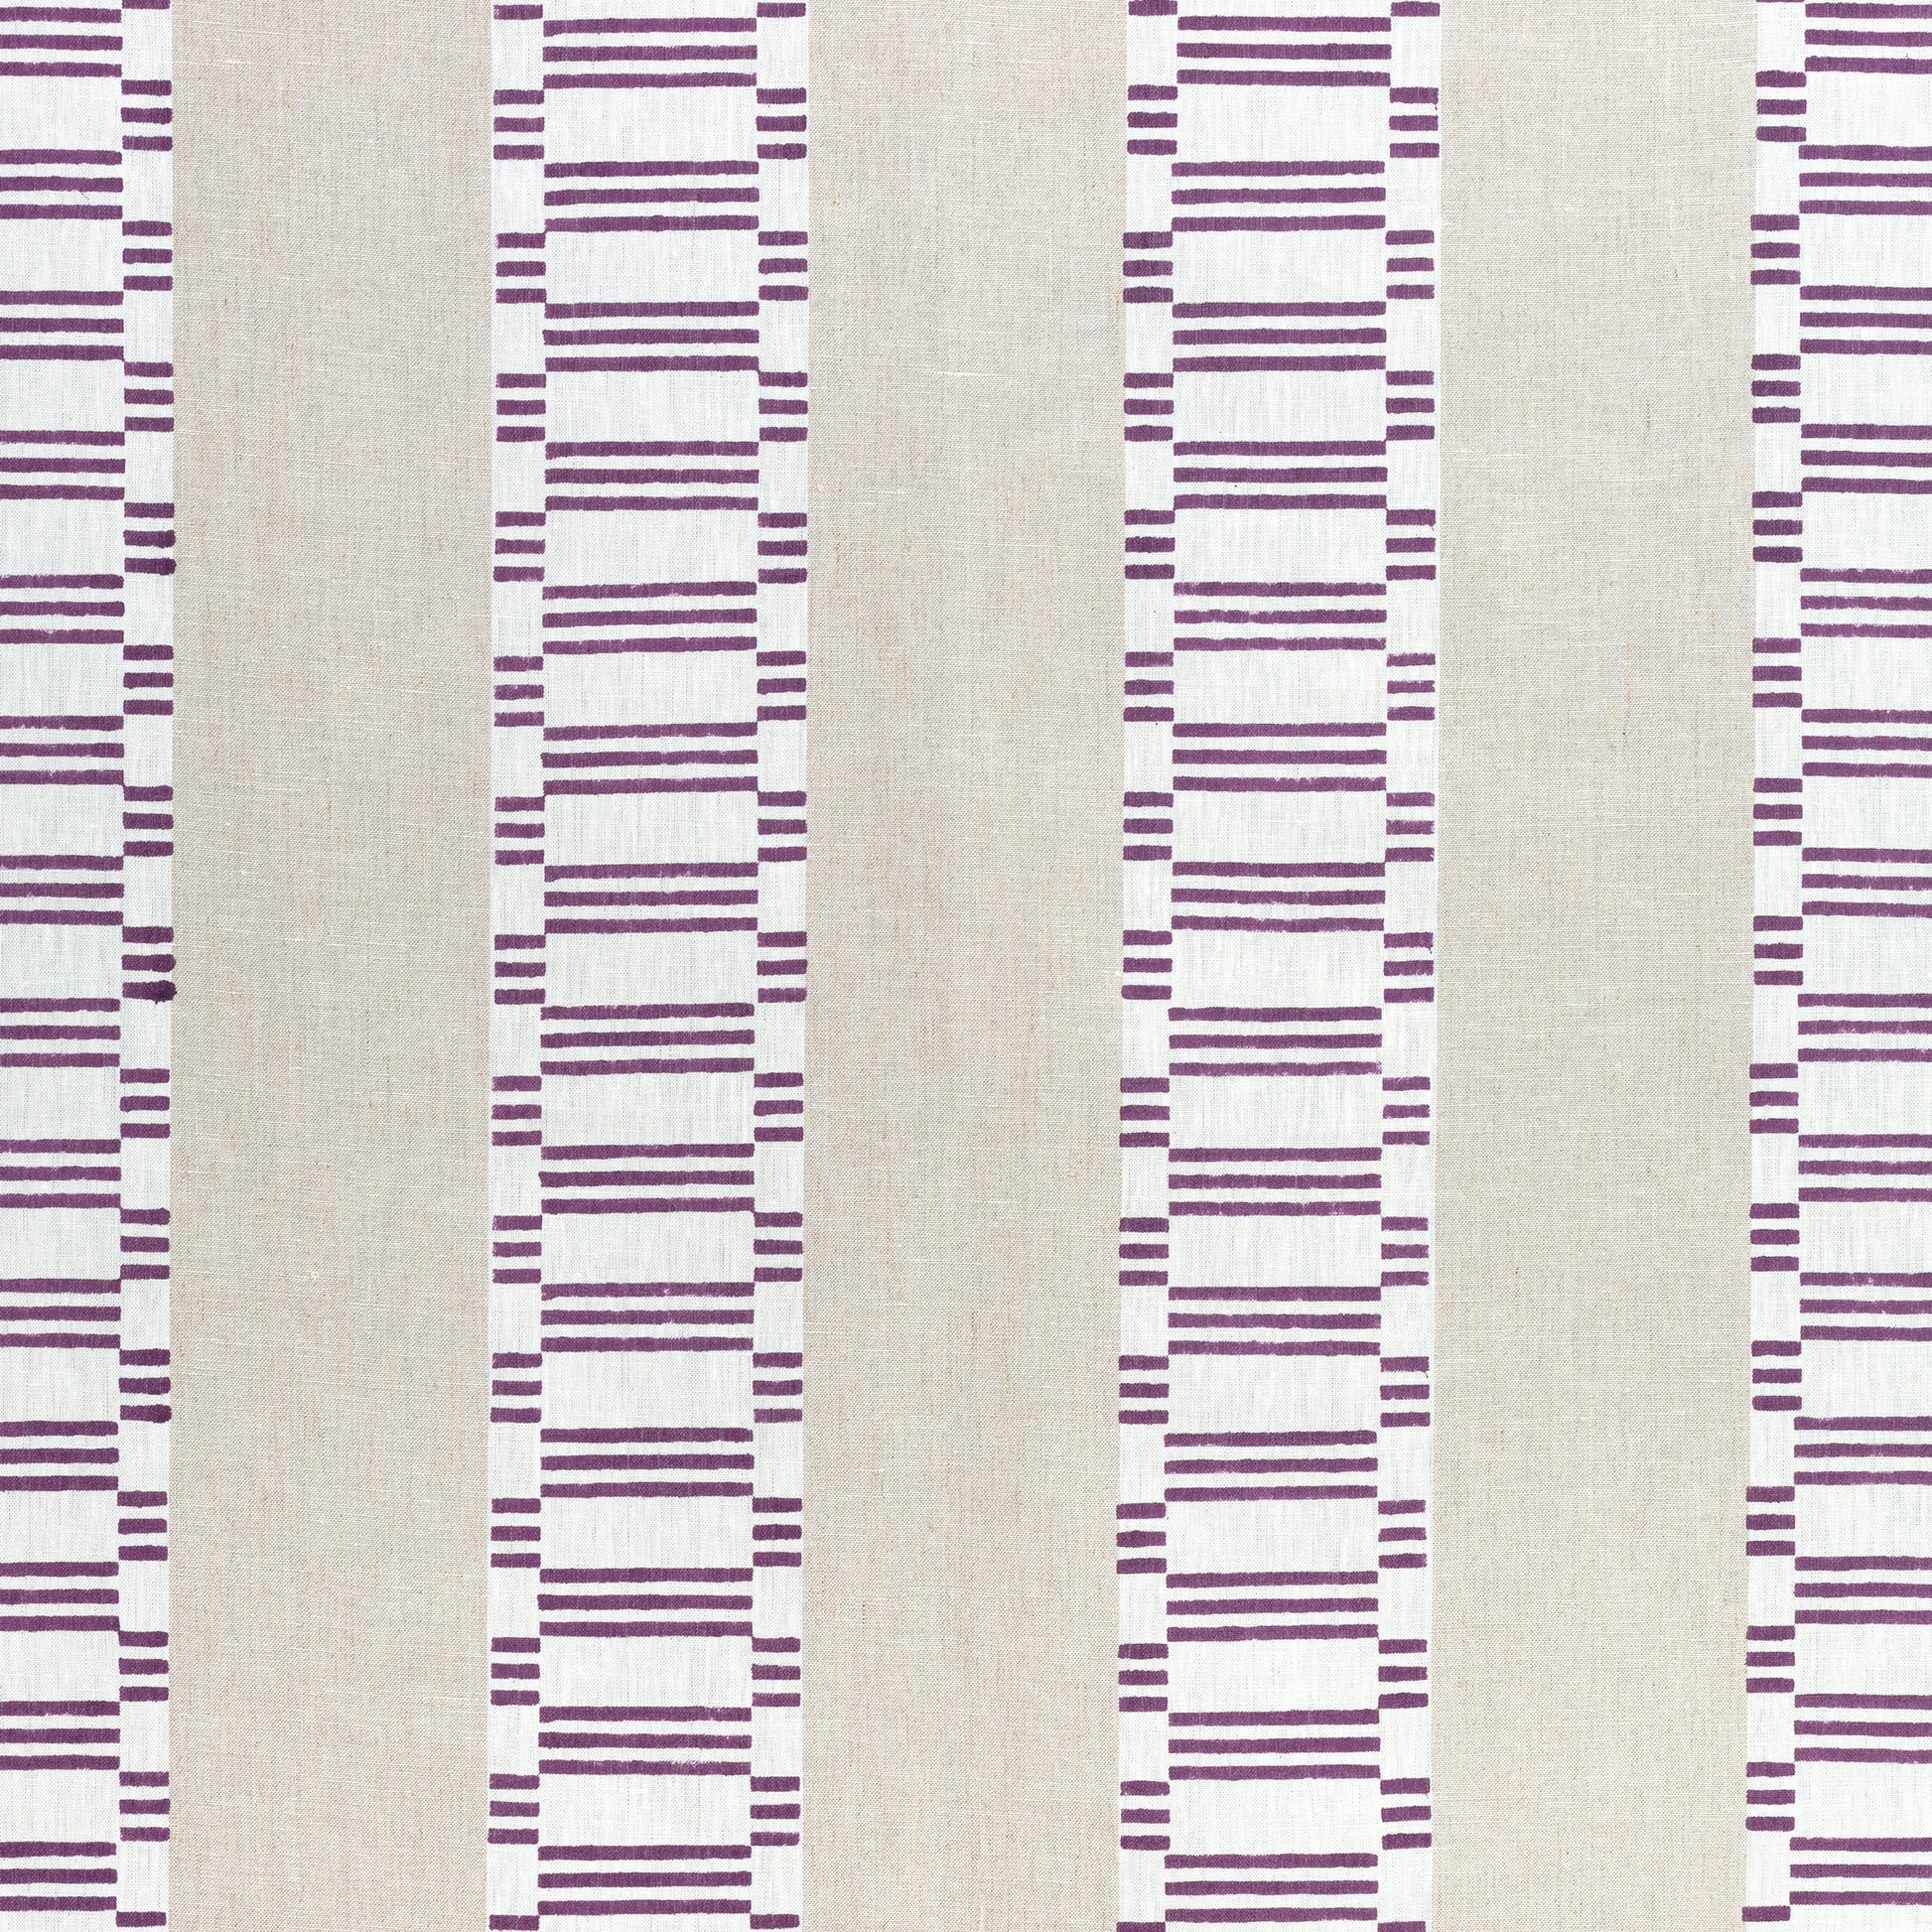 Purchase  Ann French Fabric Pattern number AF9825  pattern name  Japonic Stripe